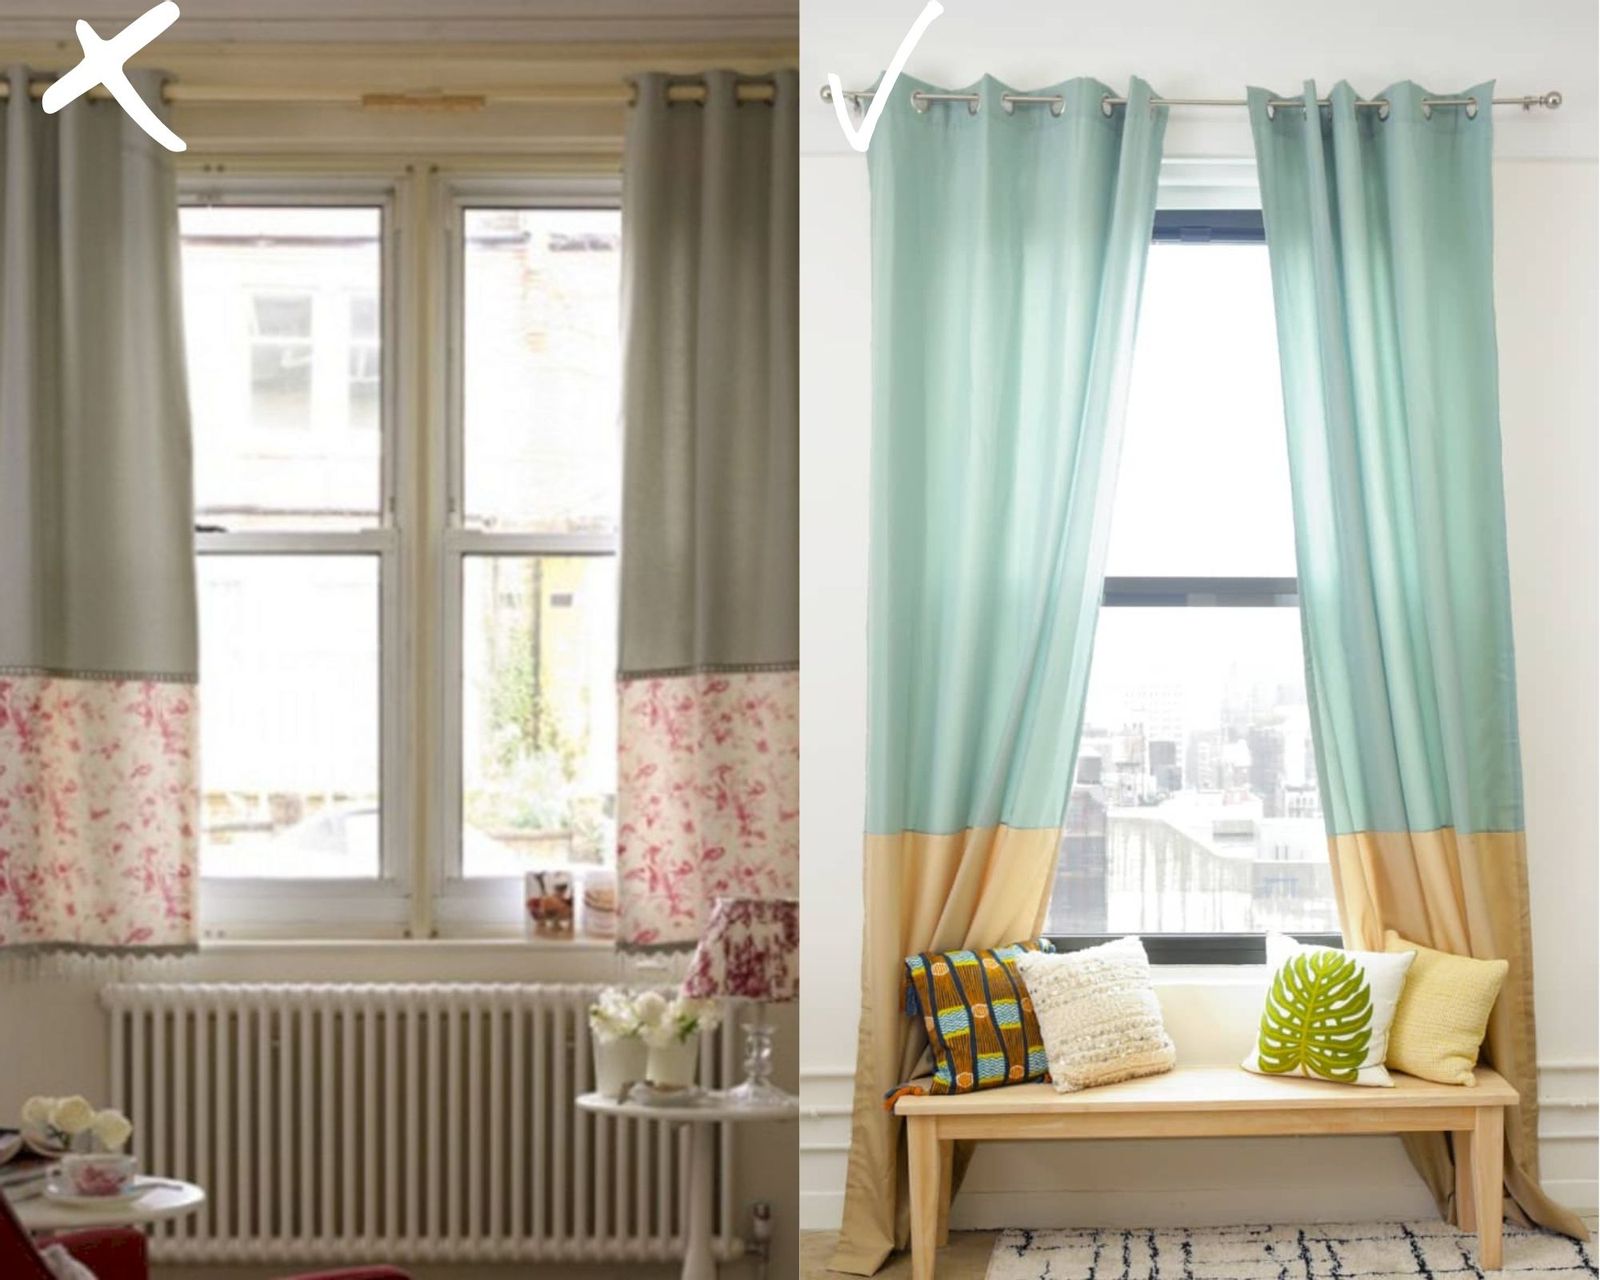 9 Things That Can Make Your Home Look Cheap